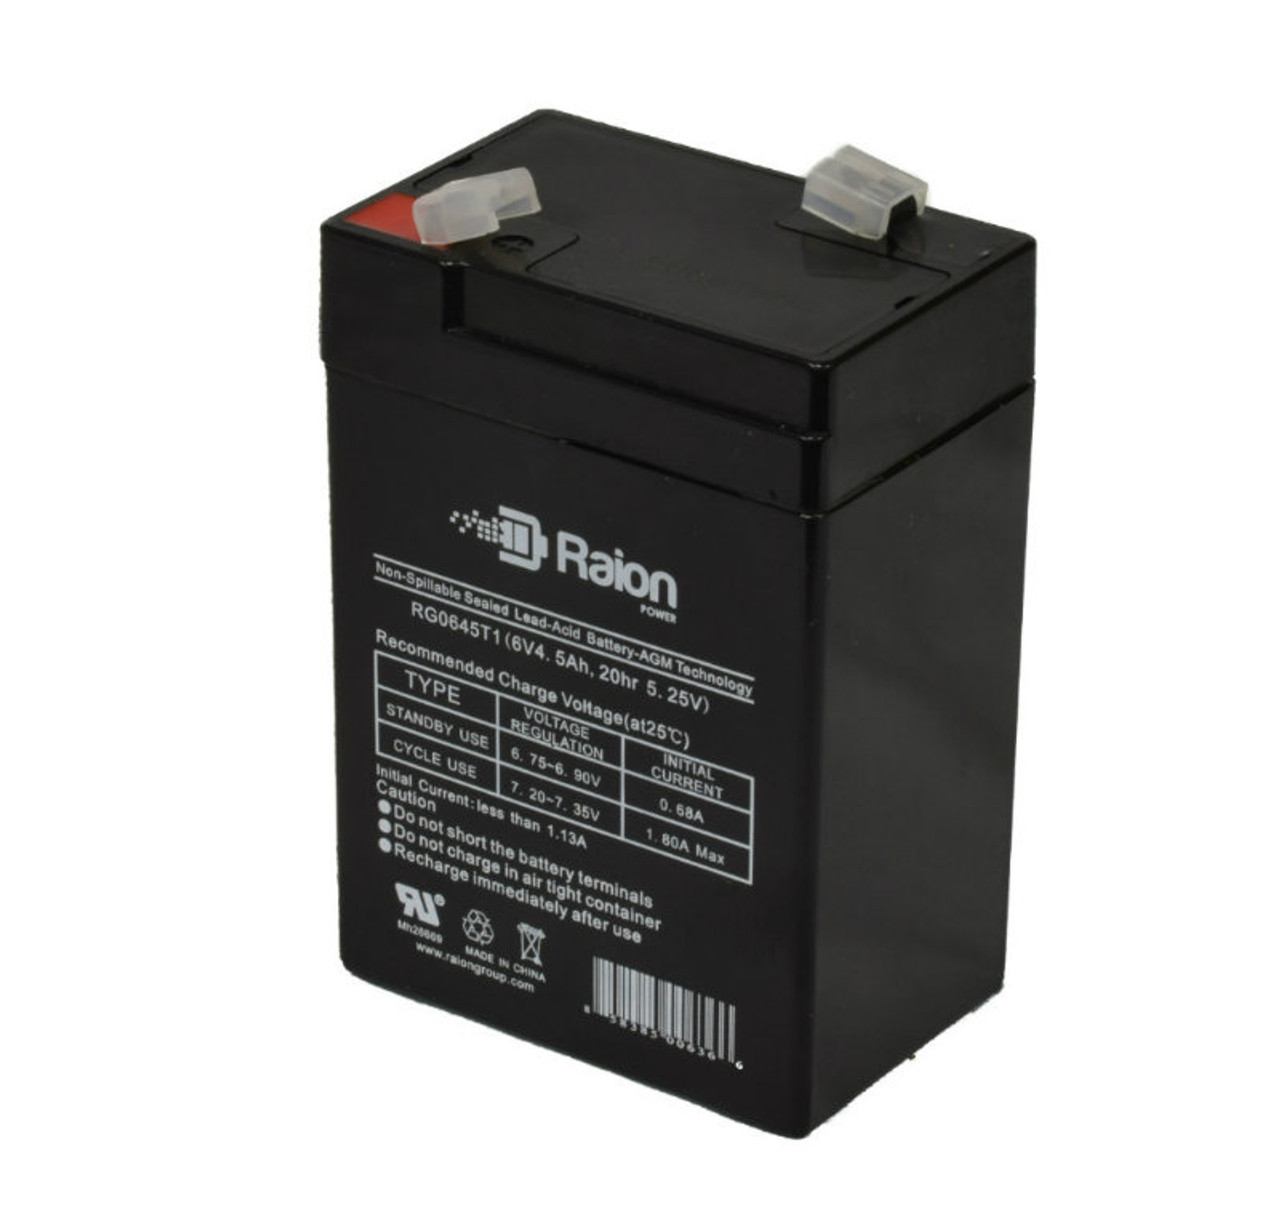 Raion Power RG0645T1 6V 4.5Ah Replacement Battery Cartridge for Kid Trax Sidekick Scooter KT1055